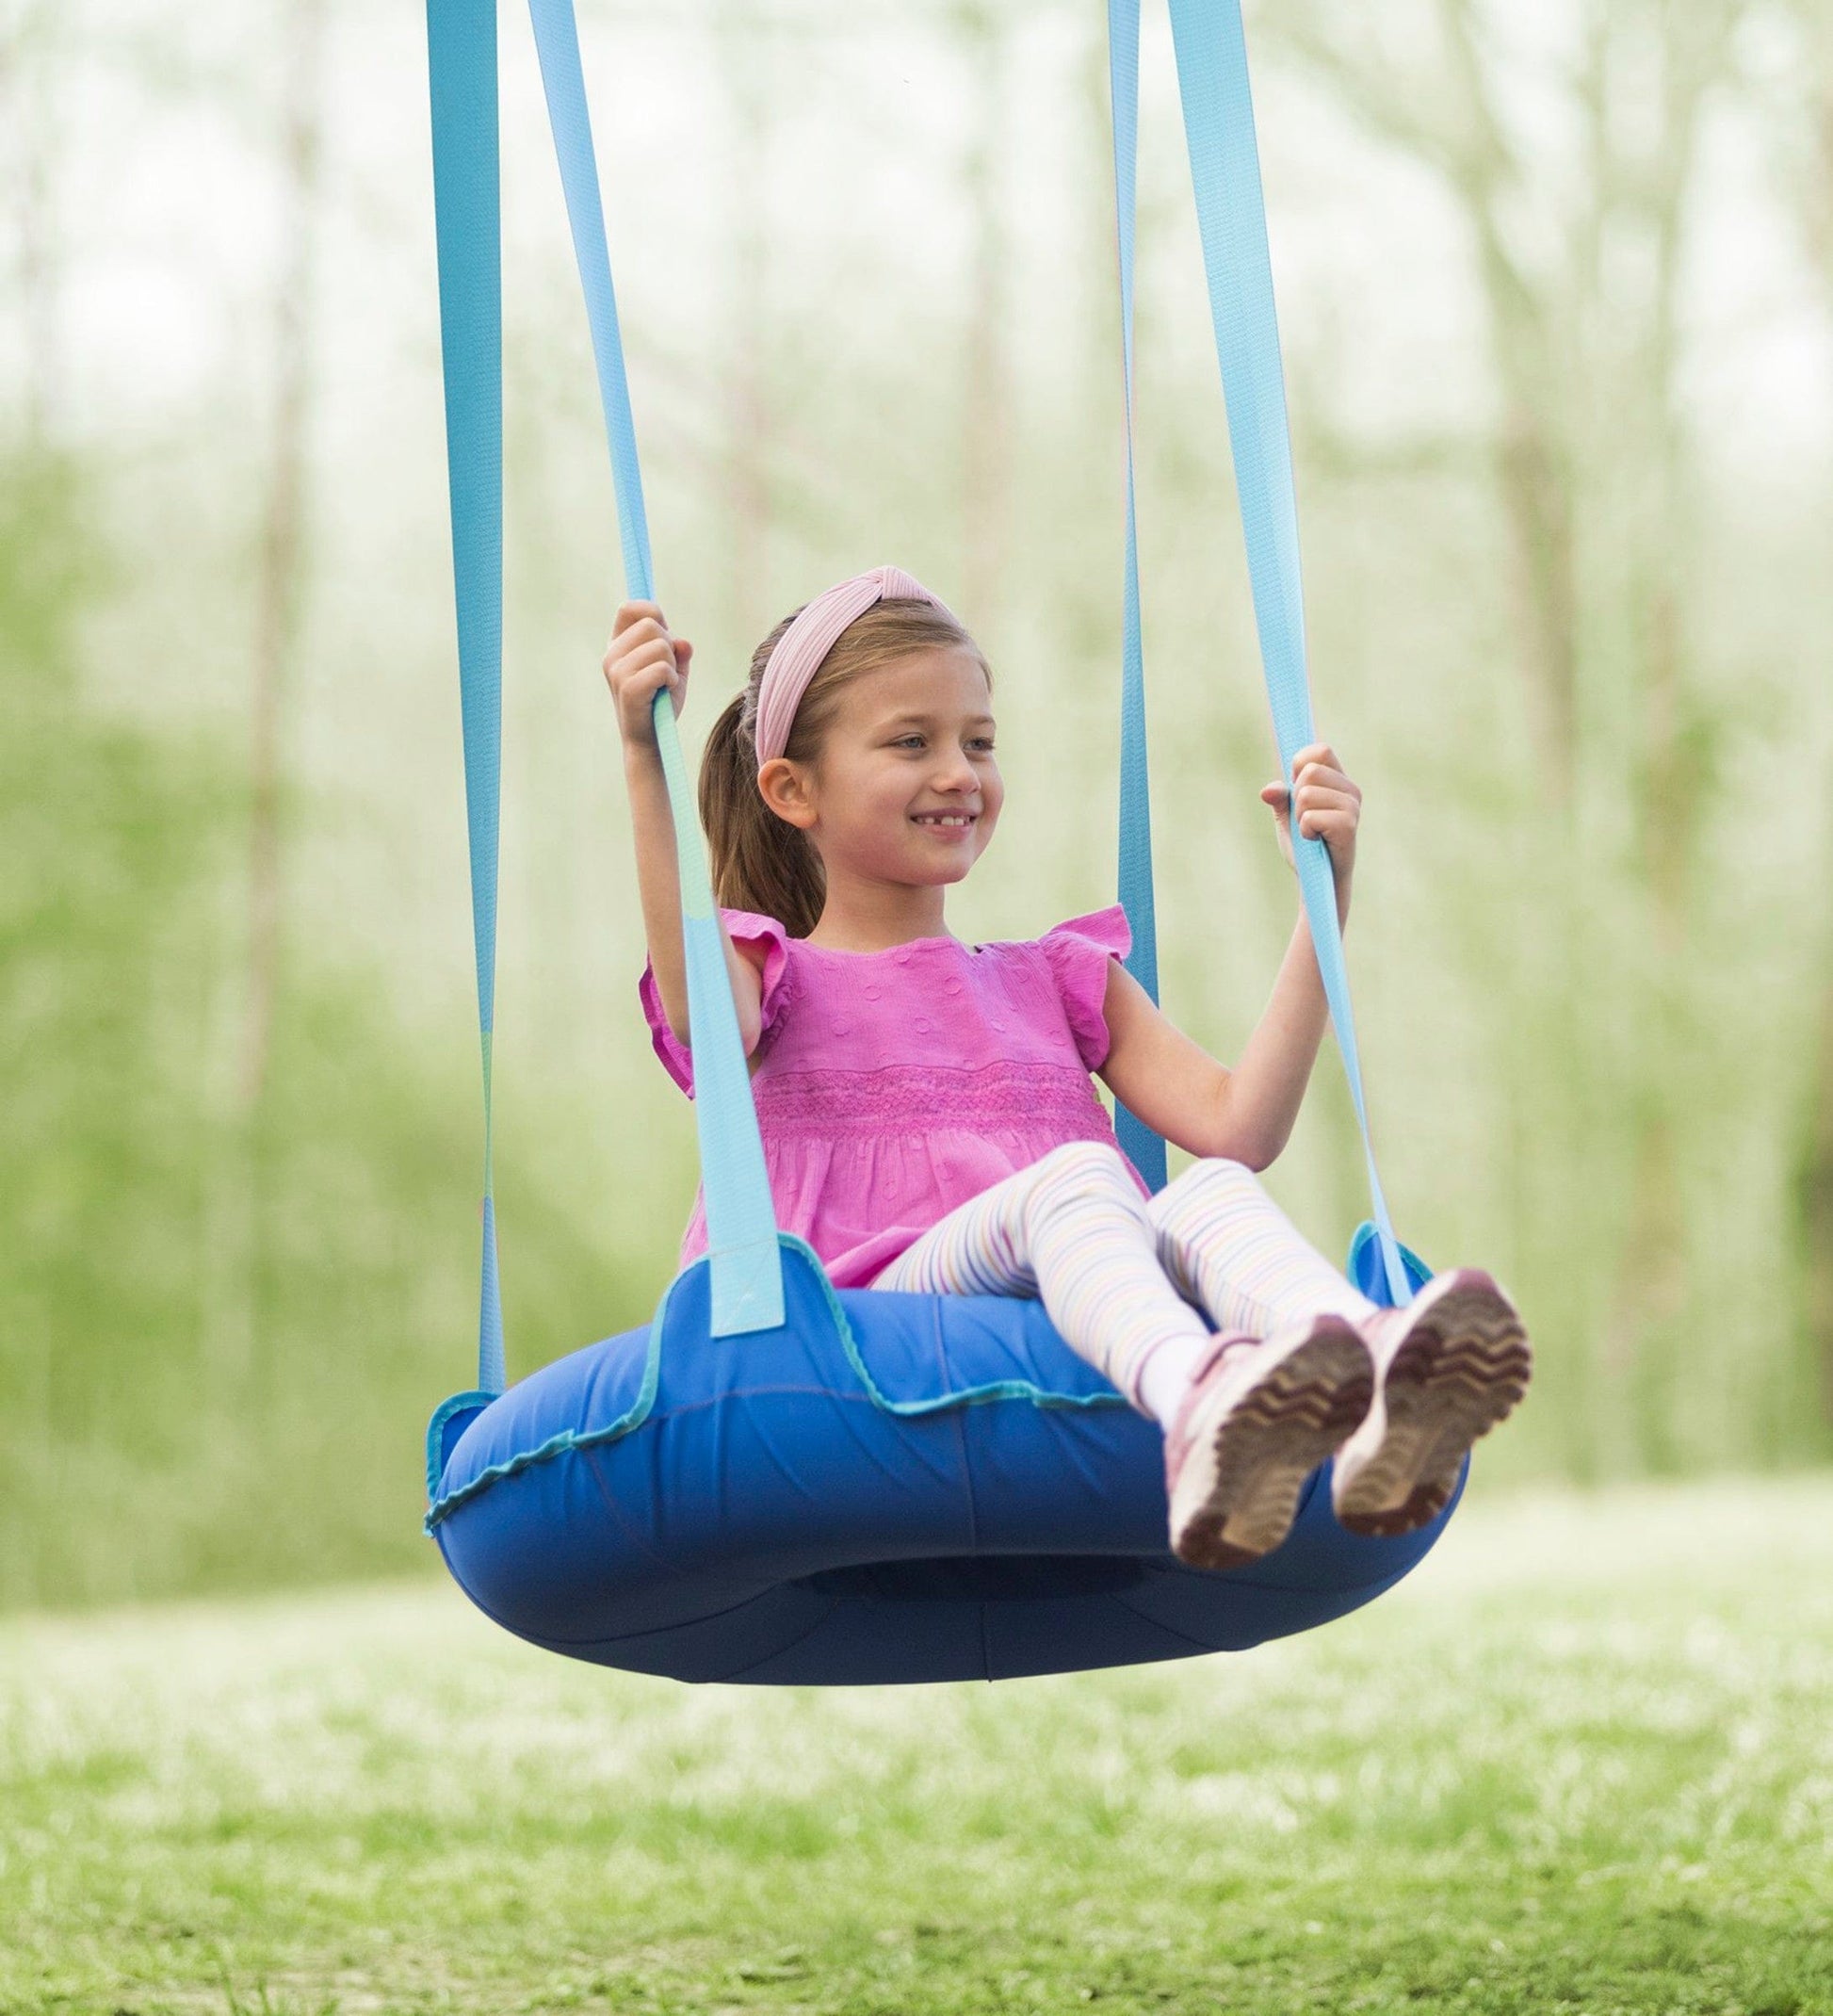 27-Inch Inflatable Flying Saucer Swing